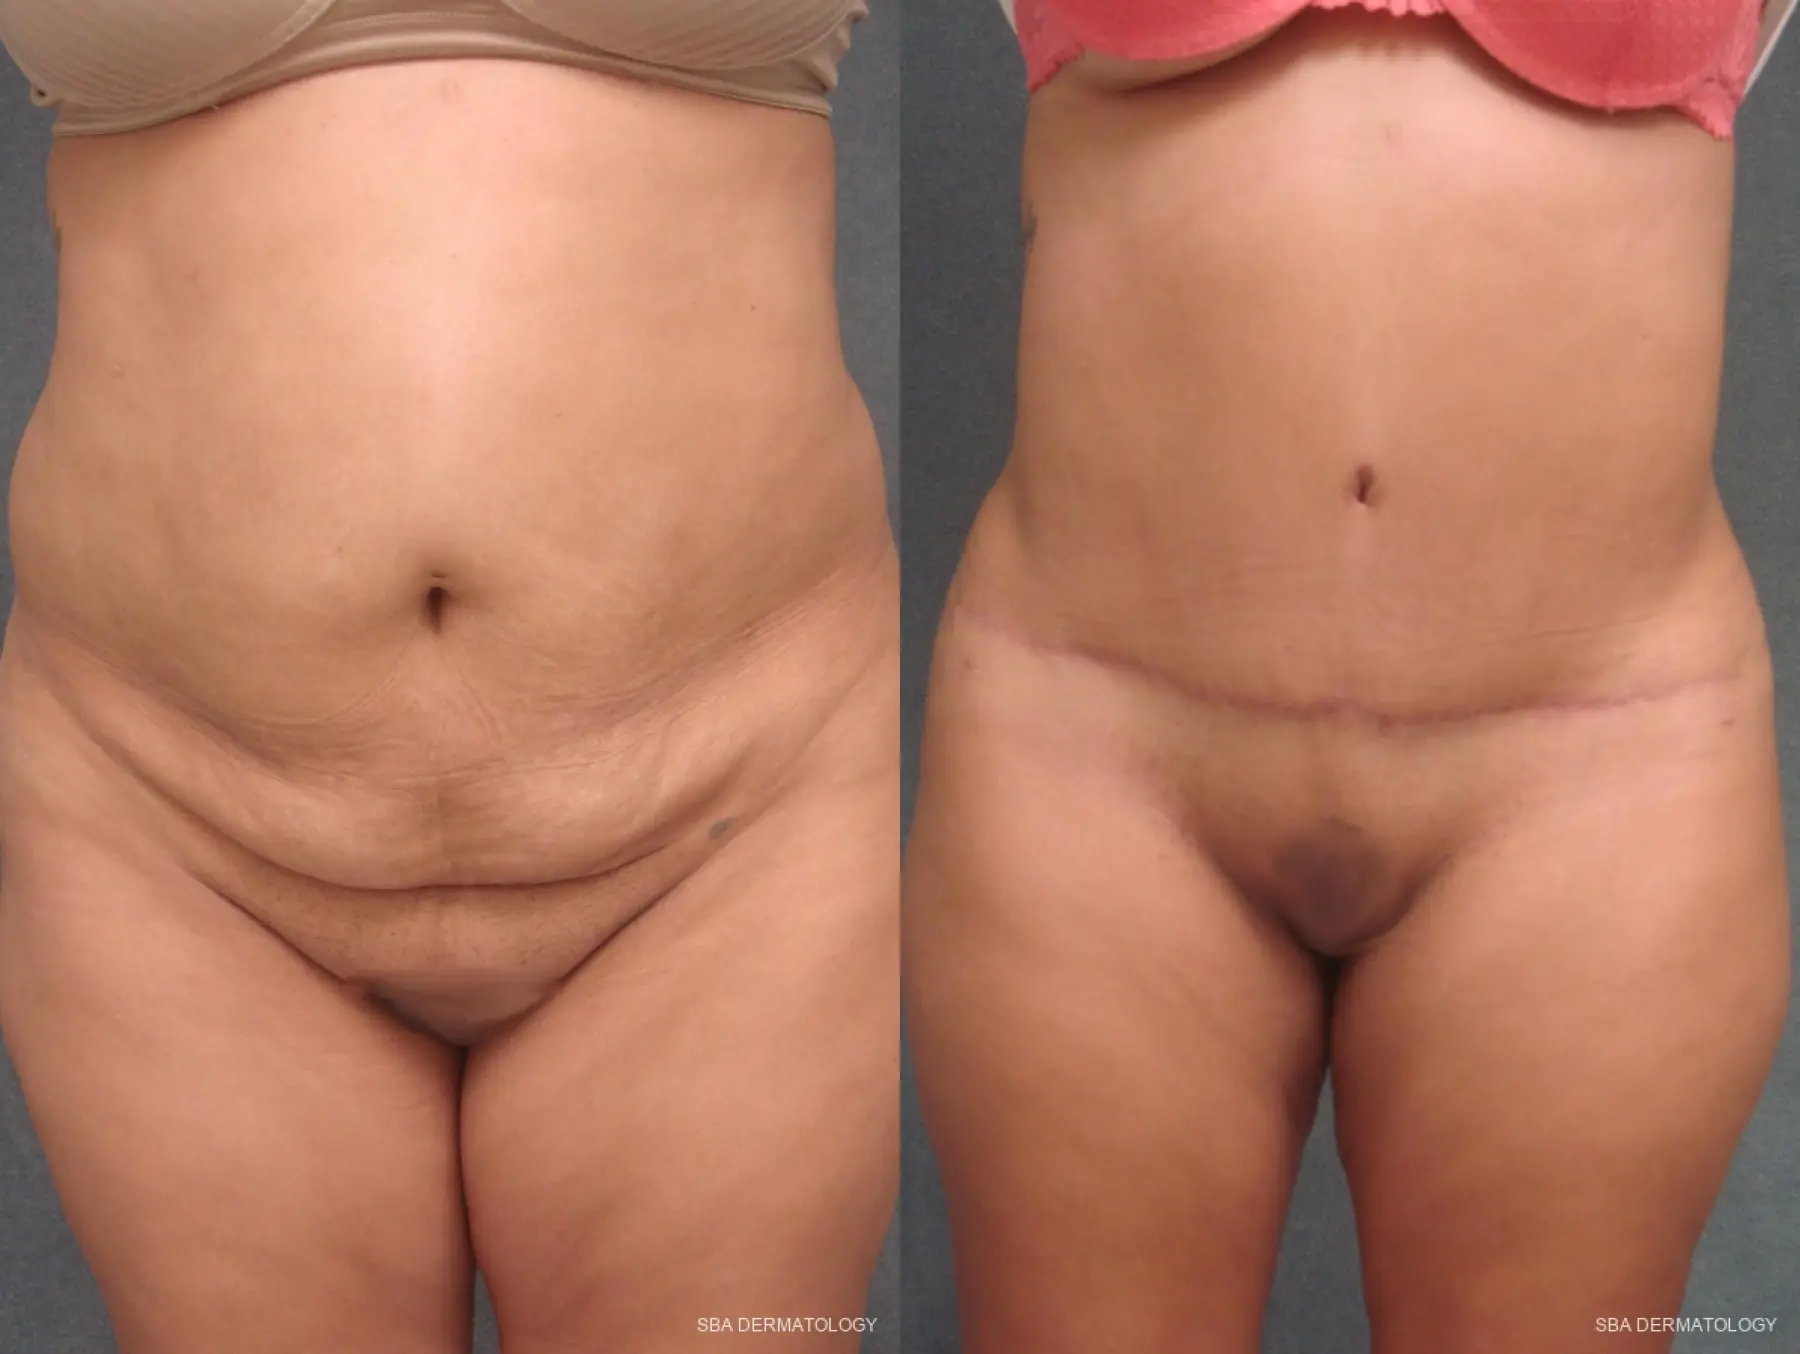 Tummy Tuck: Patient 2 - Before and After 1